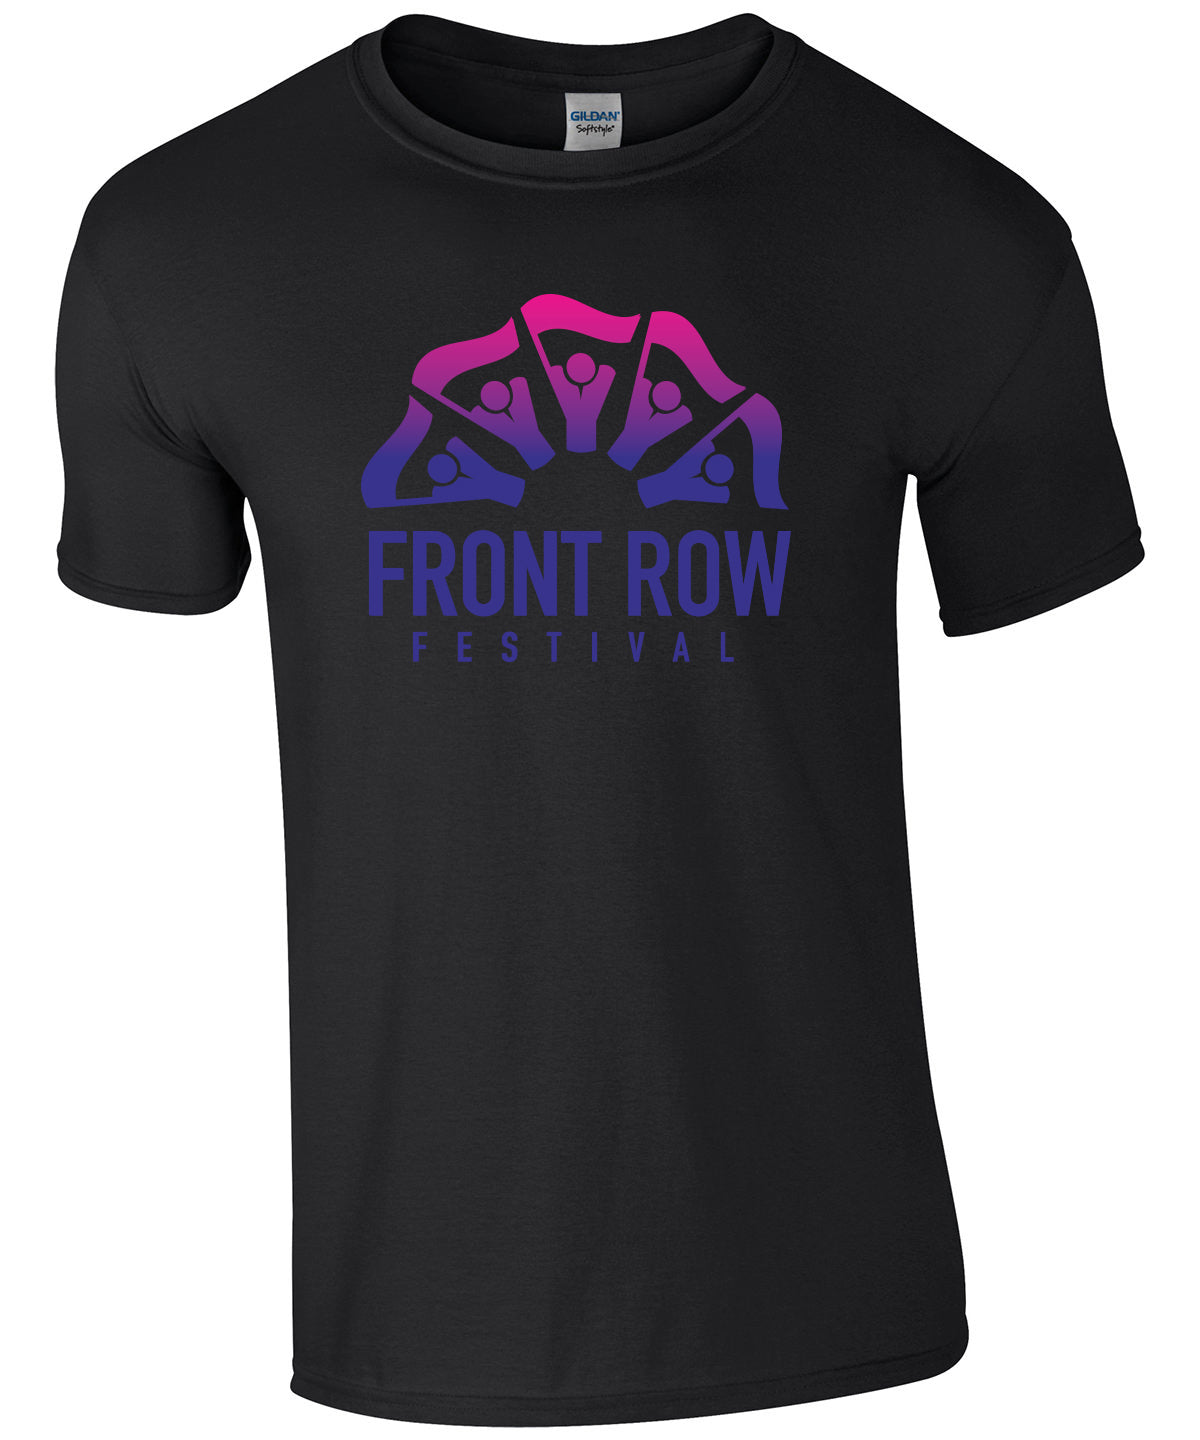 Adult T-Shirt in black - Front Row Festival